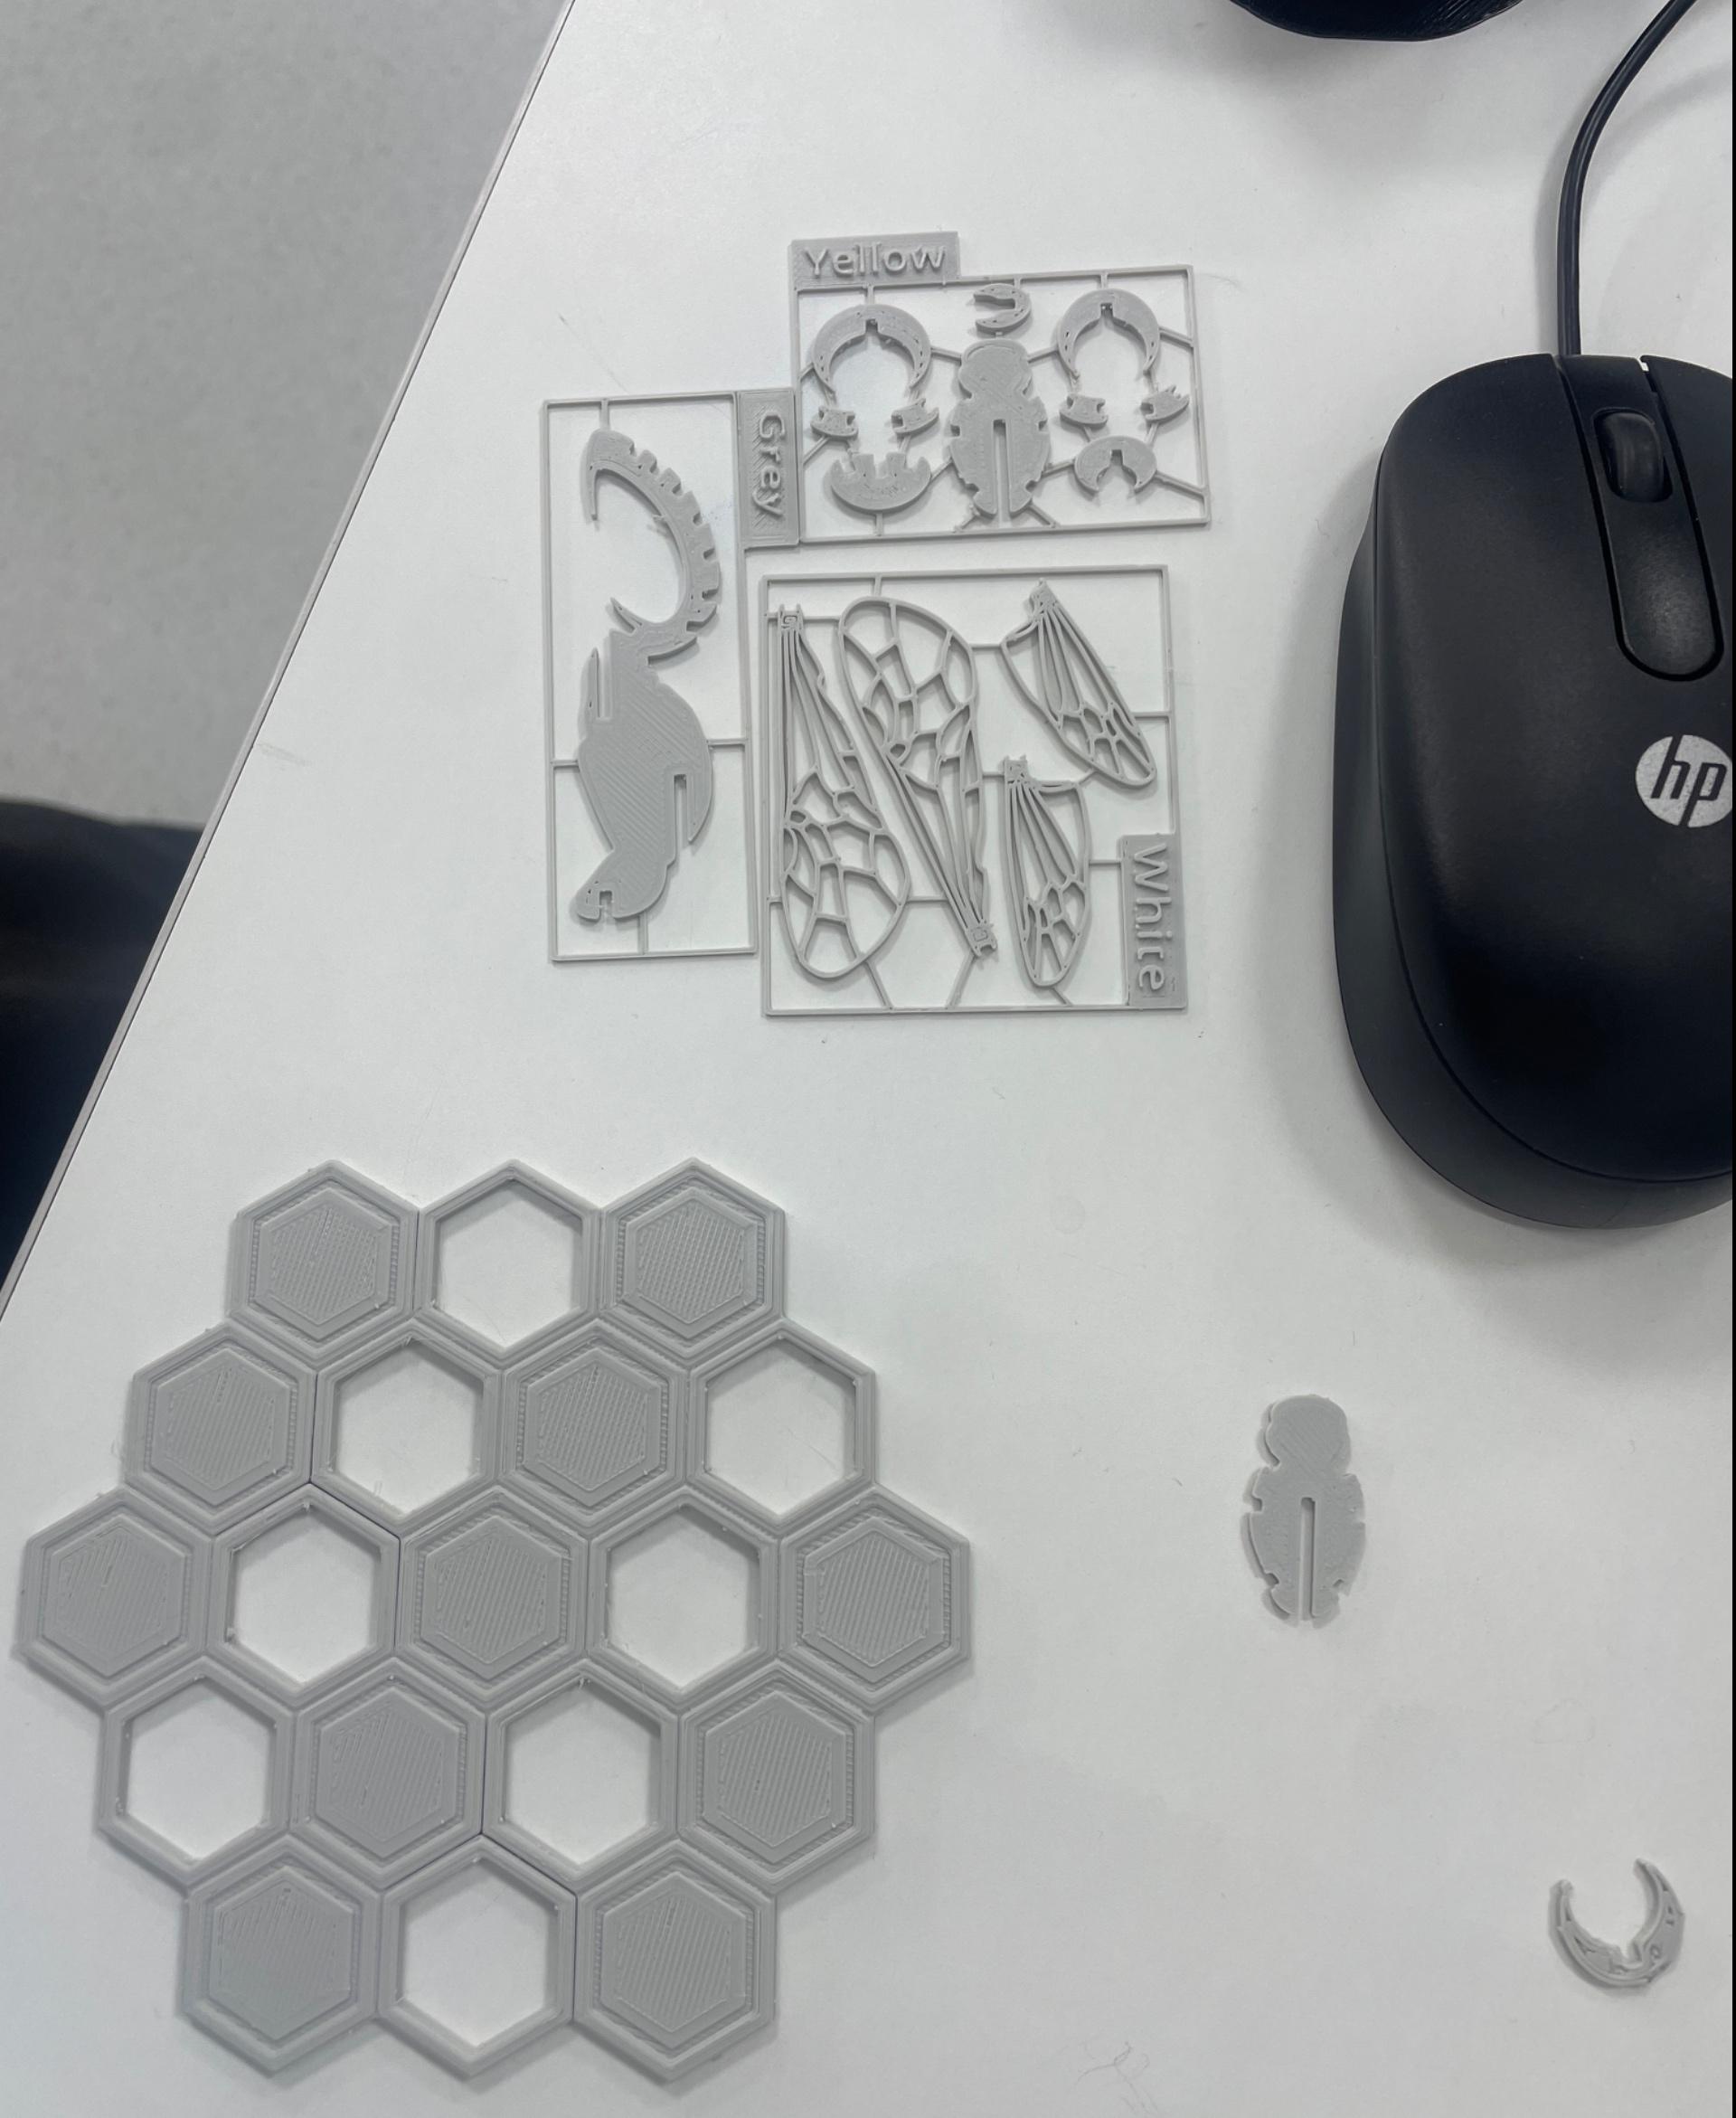 wasp - bee on honeycomb - How to build?? - 3d model